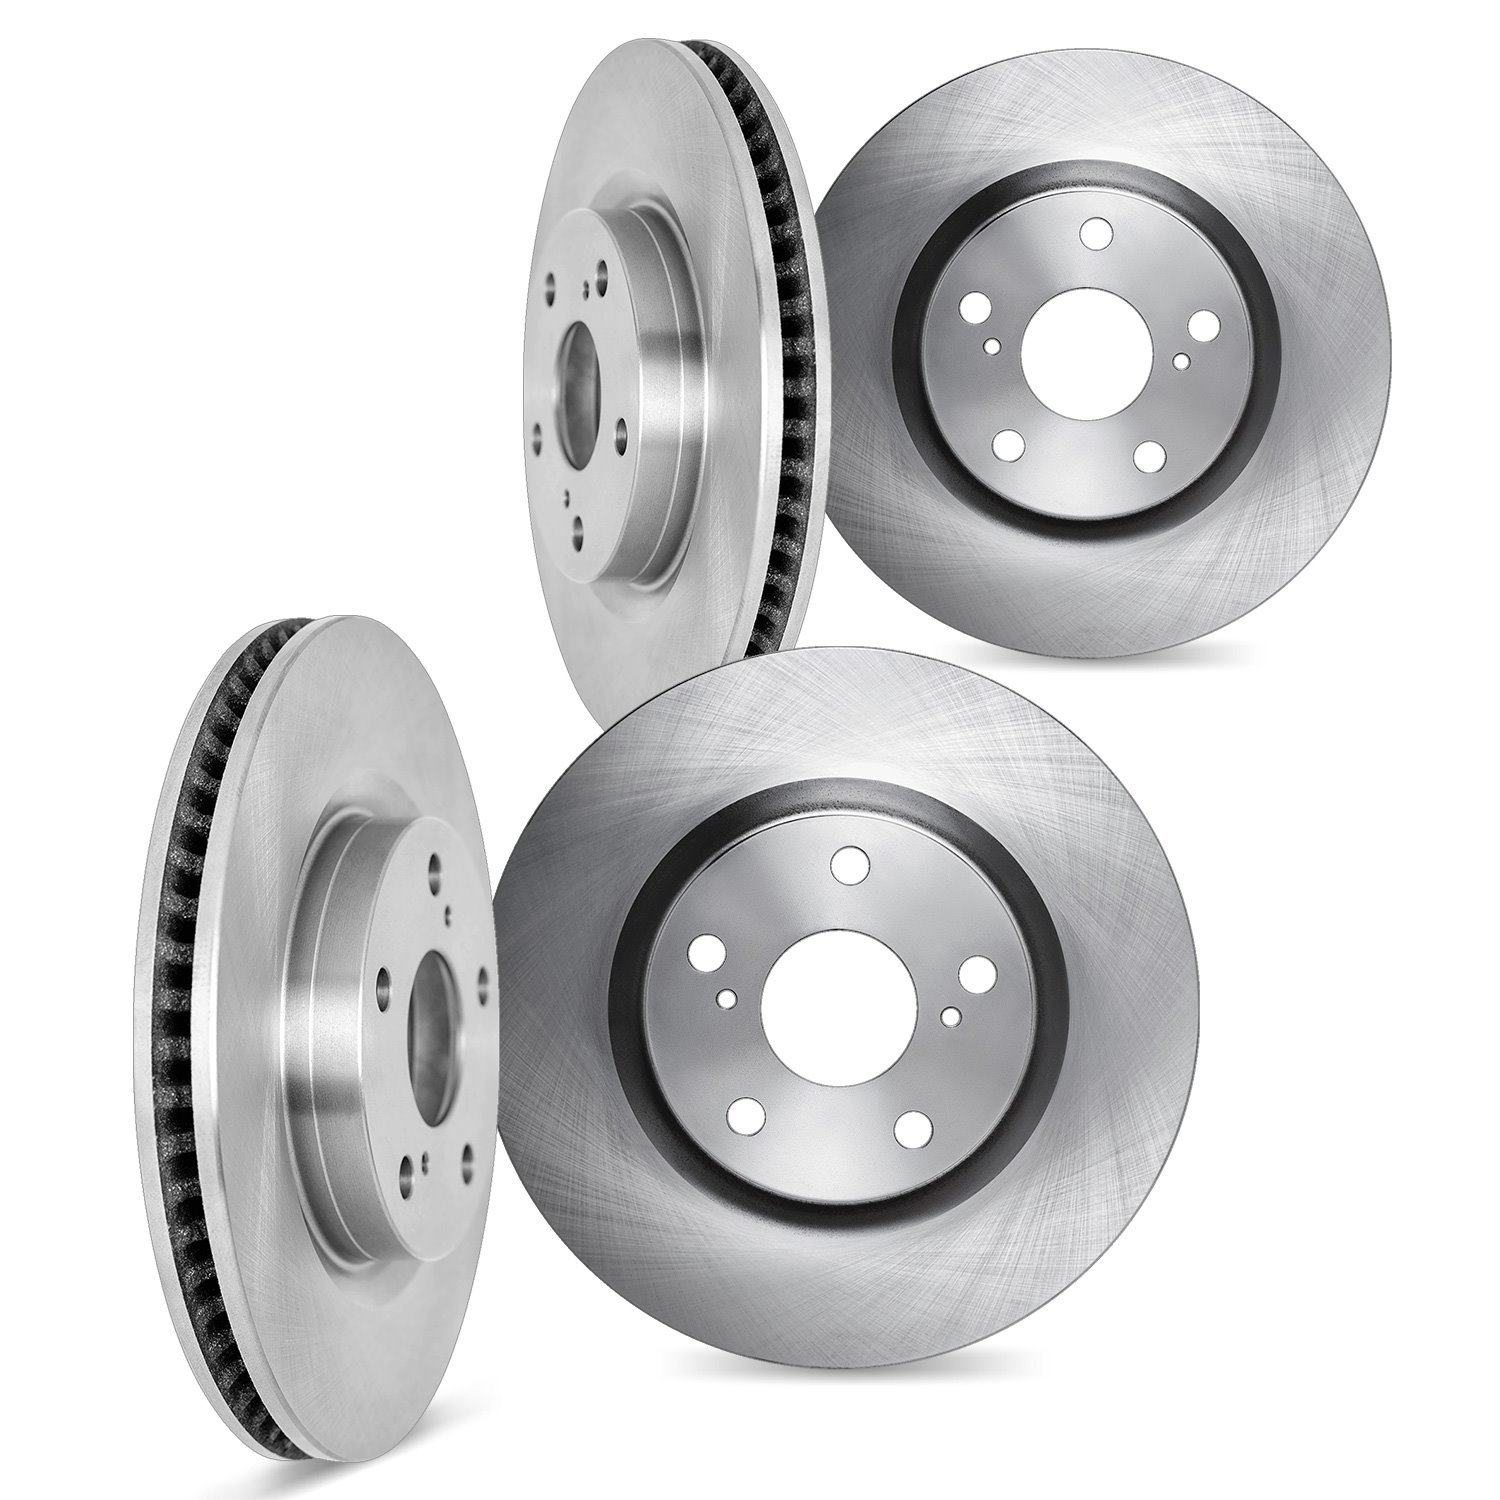 6004-73059 Brake Rotors, Fits Select Audi/Volkswagen, Position: Front and Rear